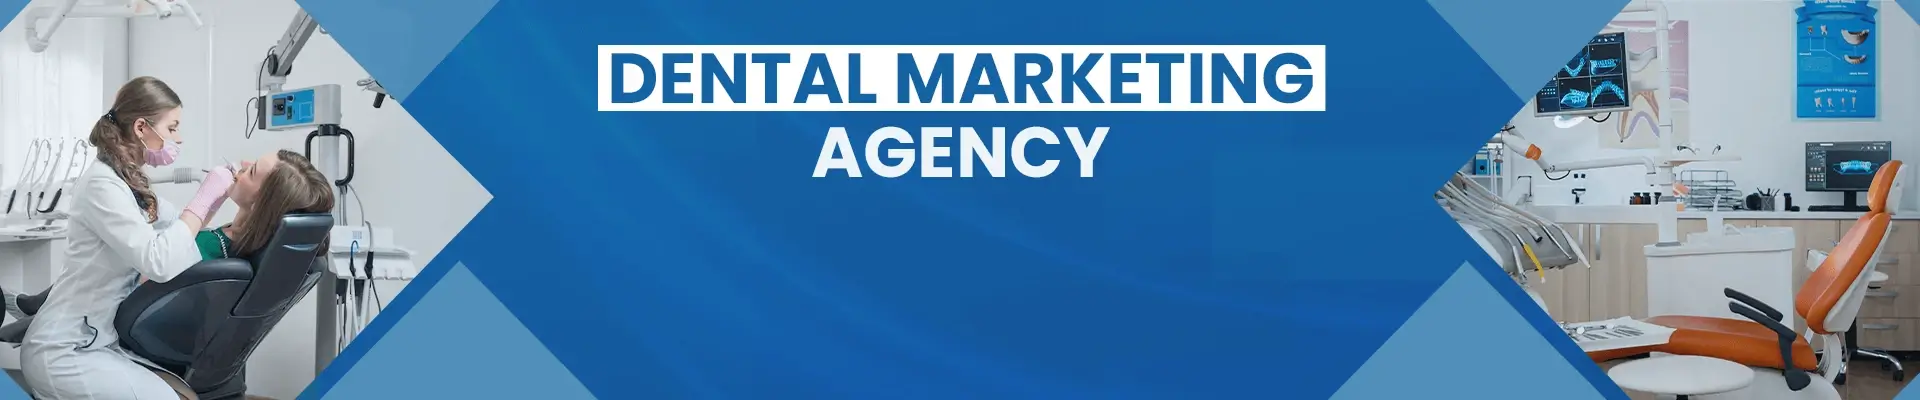 Dental Digital Marketing Services for Dentists - Know Its Dental Practices